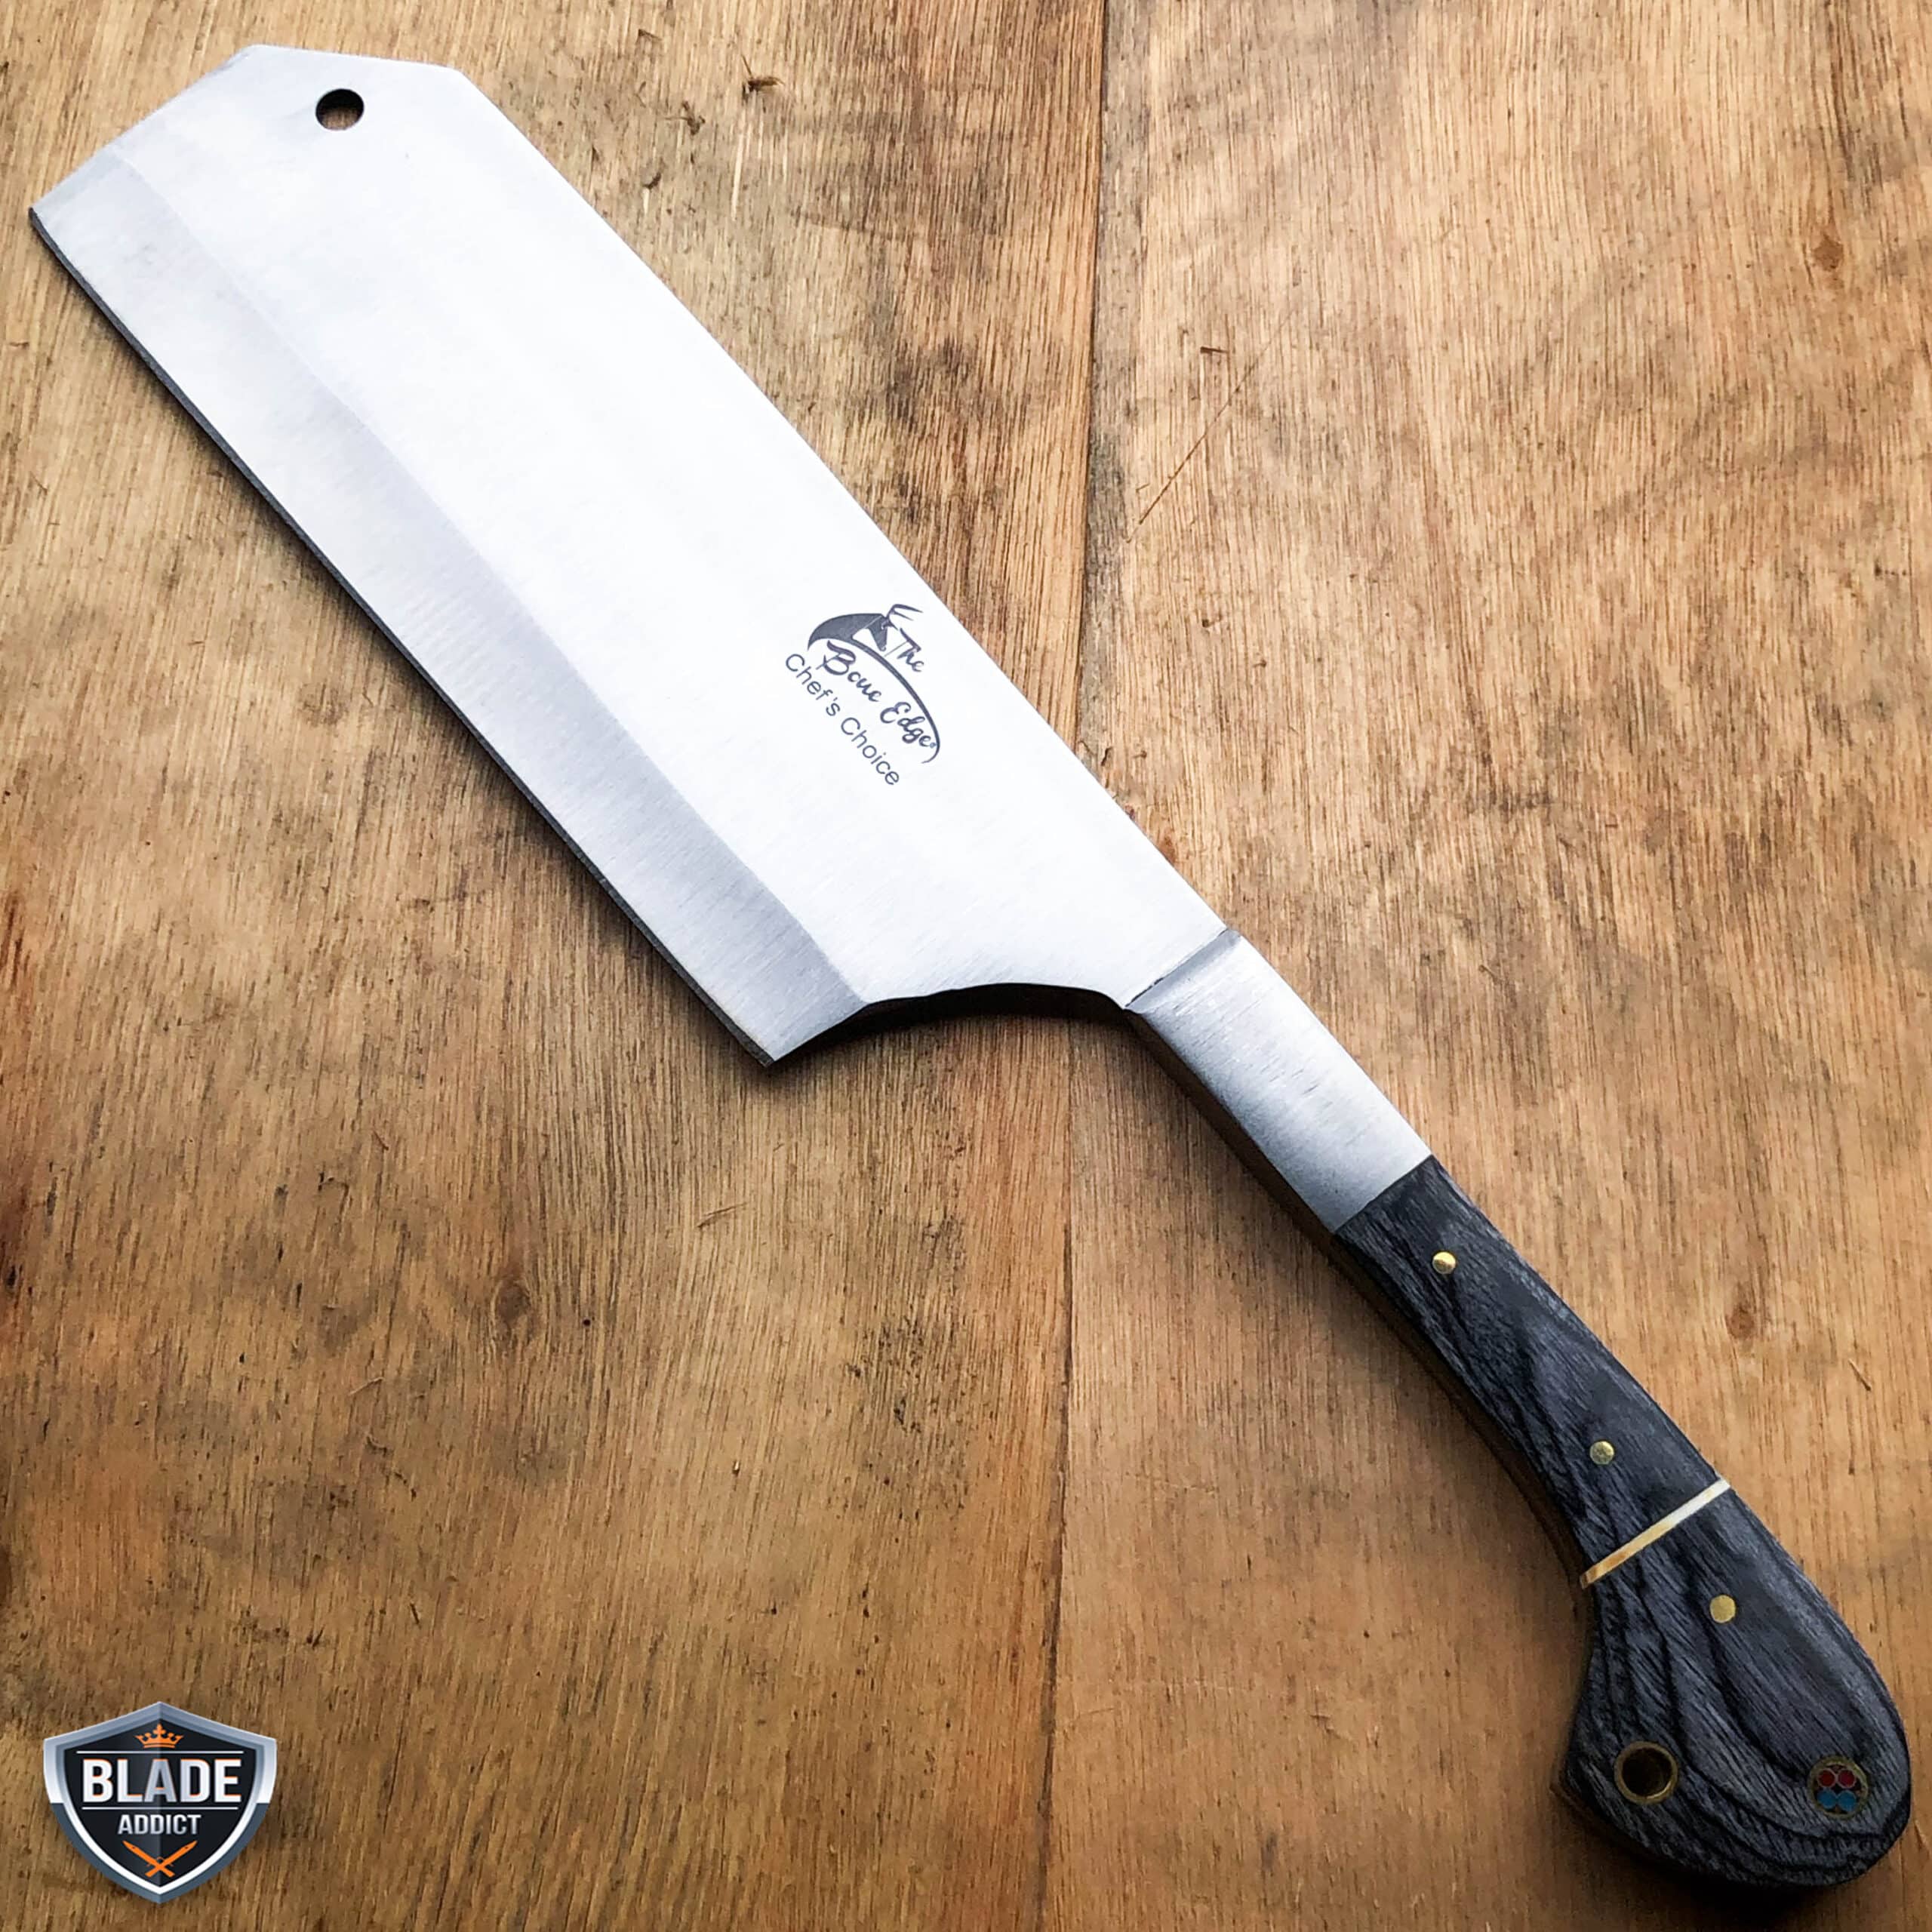 12" MEAT CLEAVER CHEF BUTCHER KNIFE Stainless Steel Chopper Full Tang Kitchen